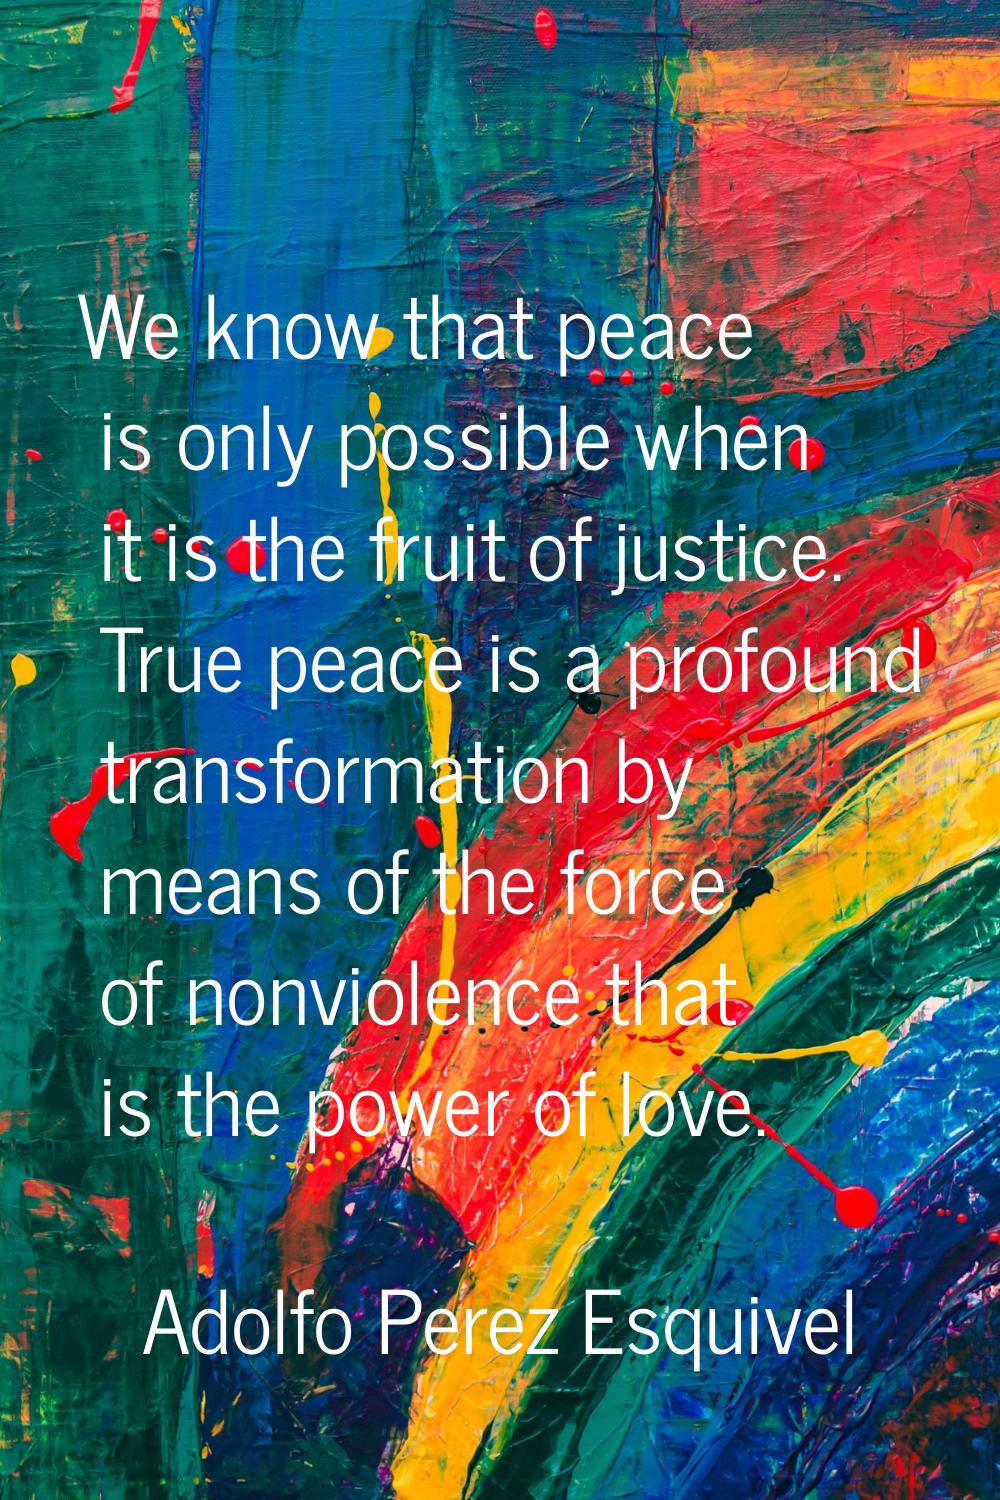 We know that peace is only possible when it is the fruit of justice. True peace is a profound trans